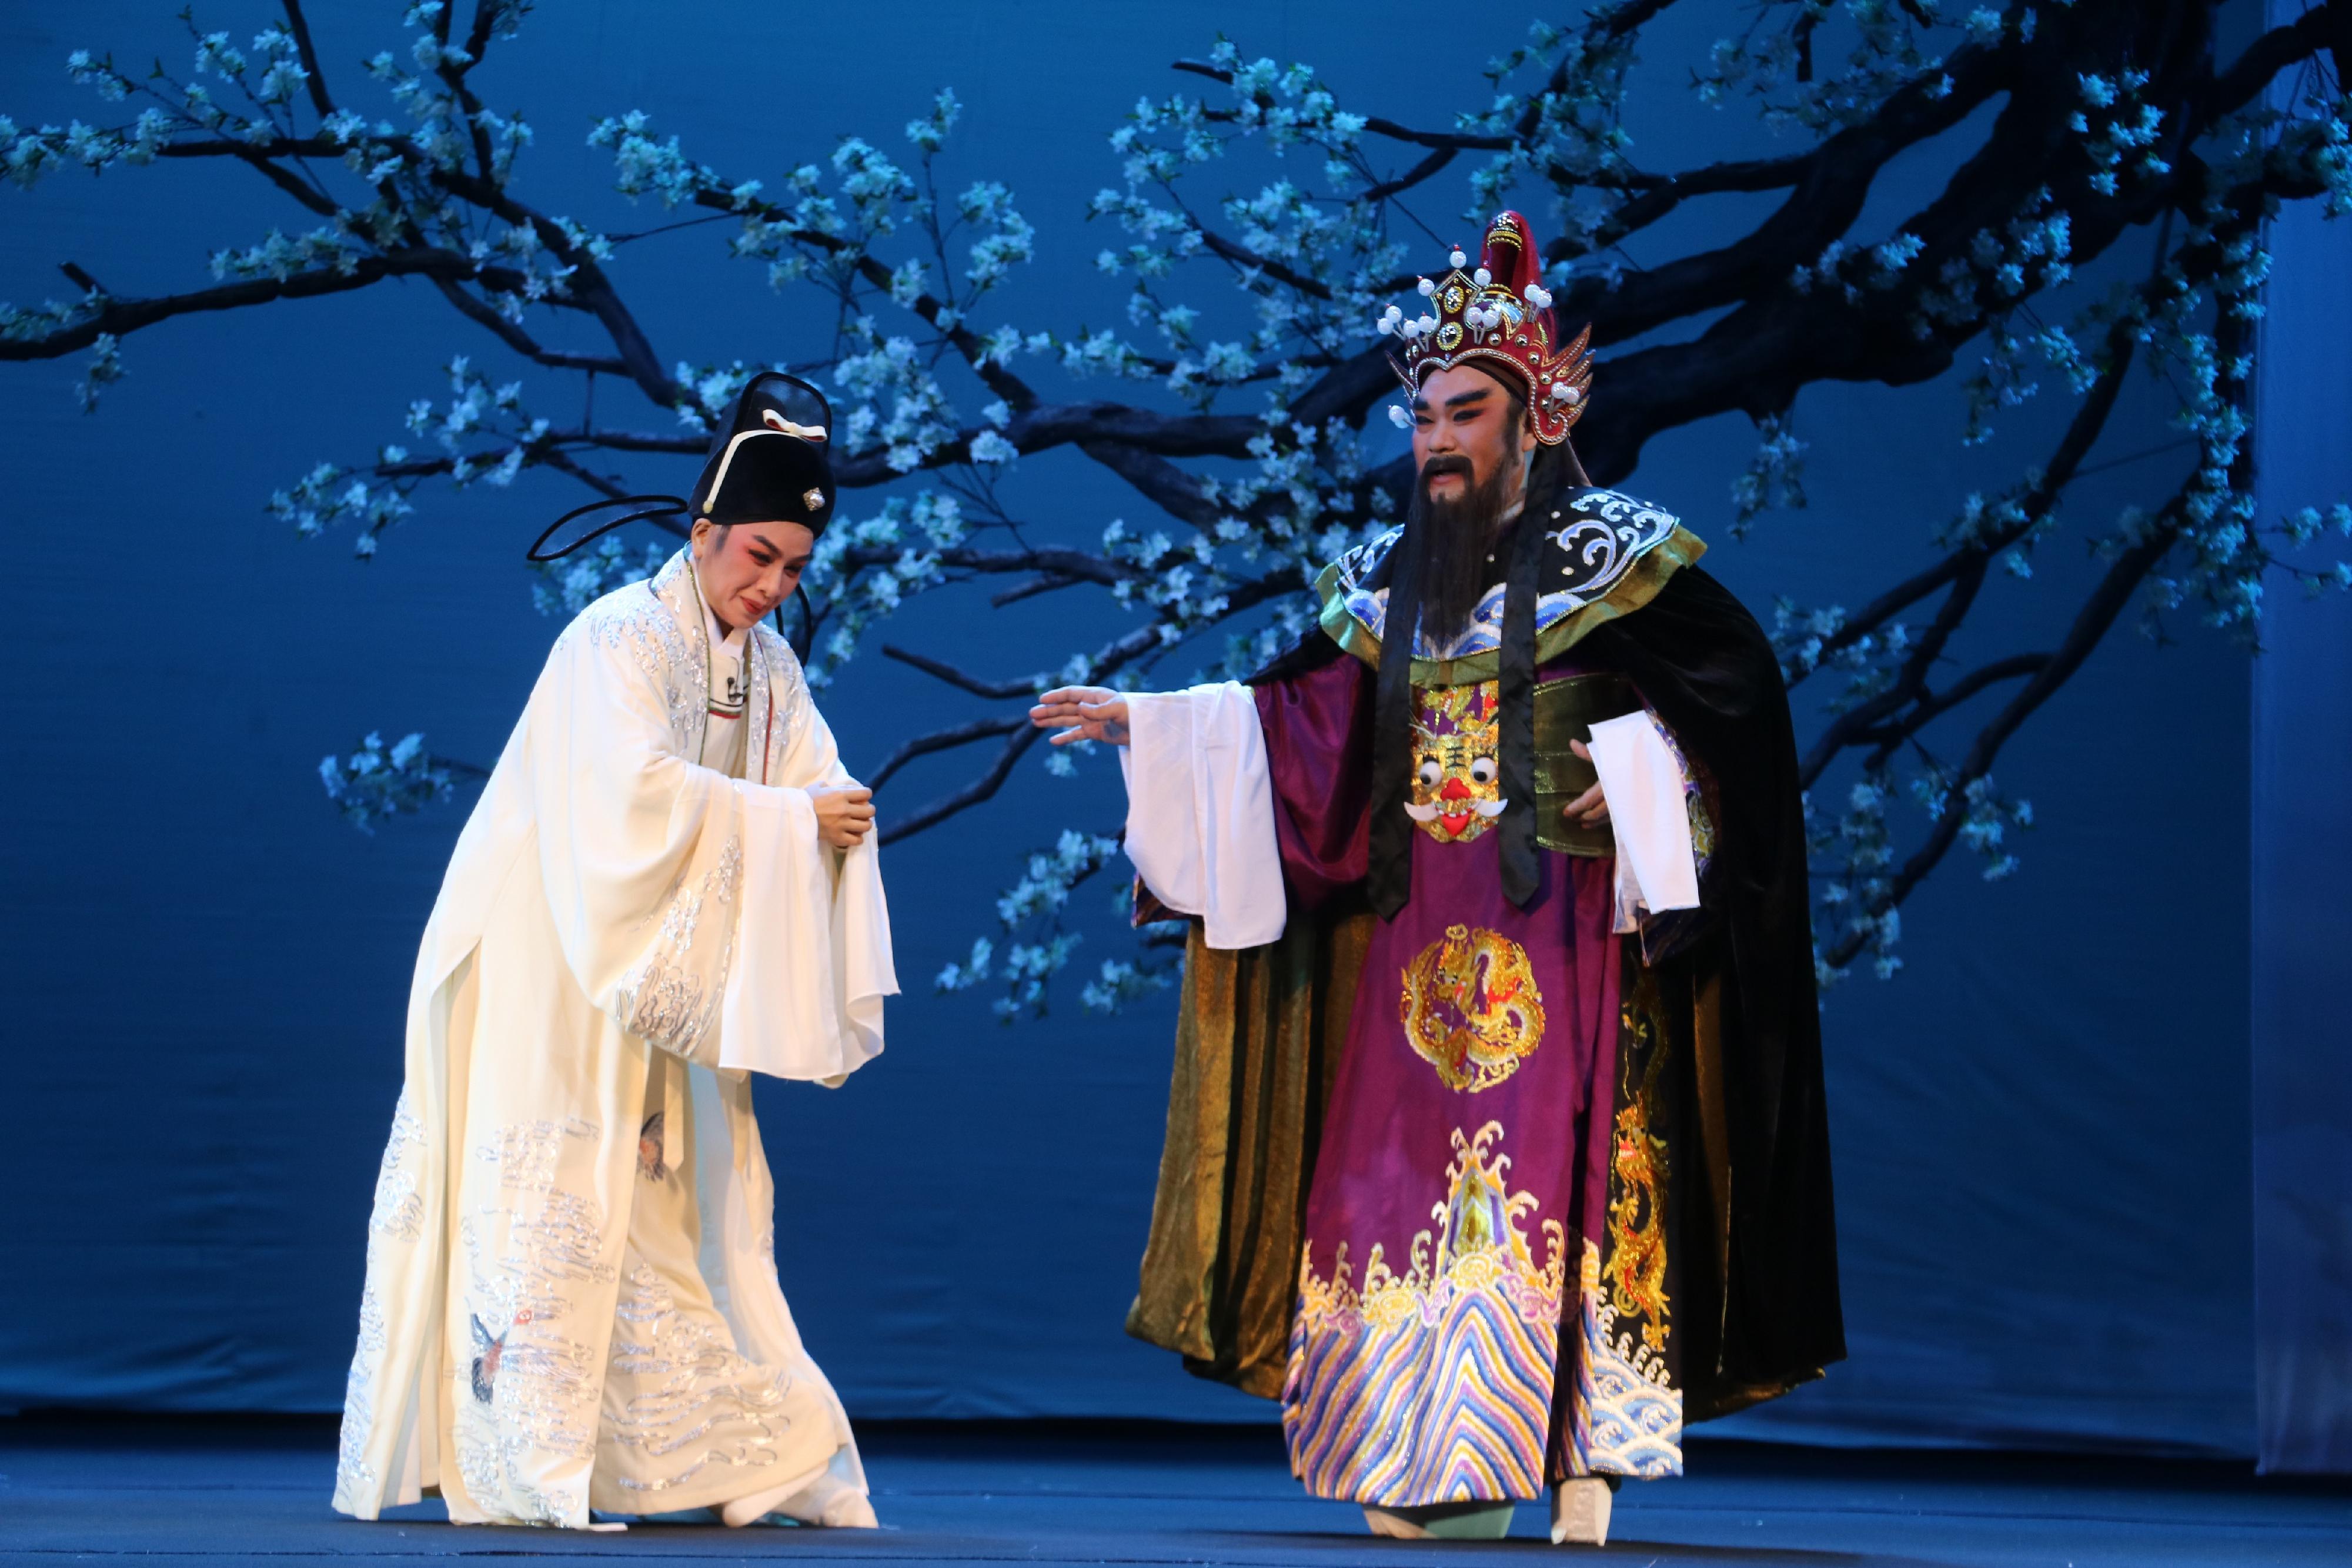 The Leisure and Cultural Services Department will present eight quality programmes at this year's Chinese Opera Festival from June to August. Photo shows a scene from the Chiuchow opera performance "Poet Li Shangyin".